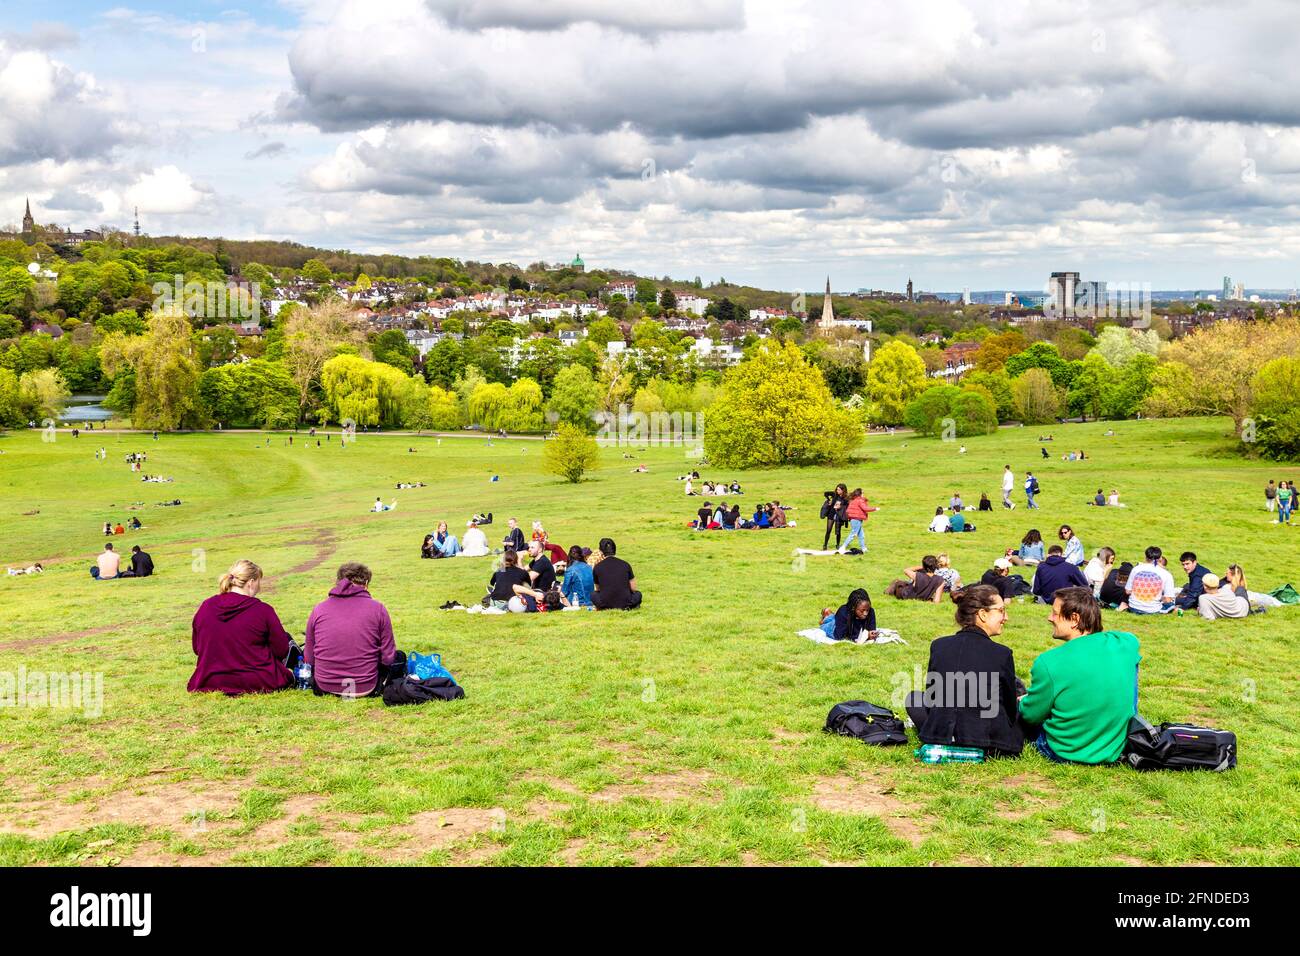 People picnicing at the Parilament Hill Viewpoint overlooking the Highgate Village, London, UK Stock Photo